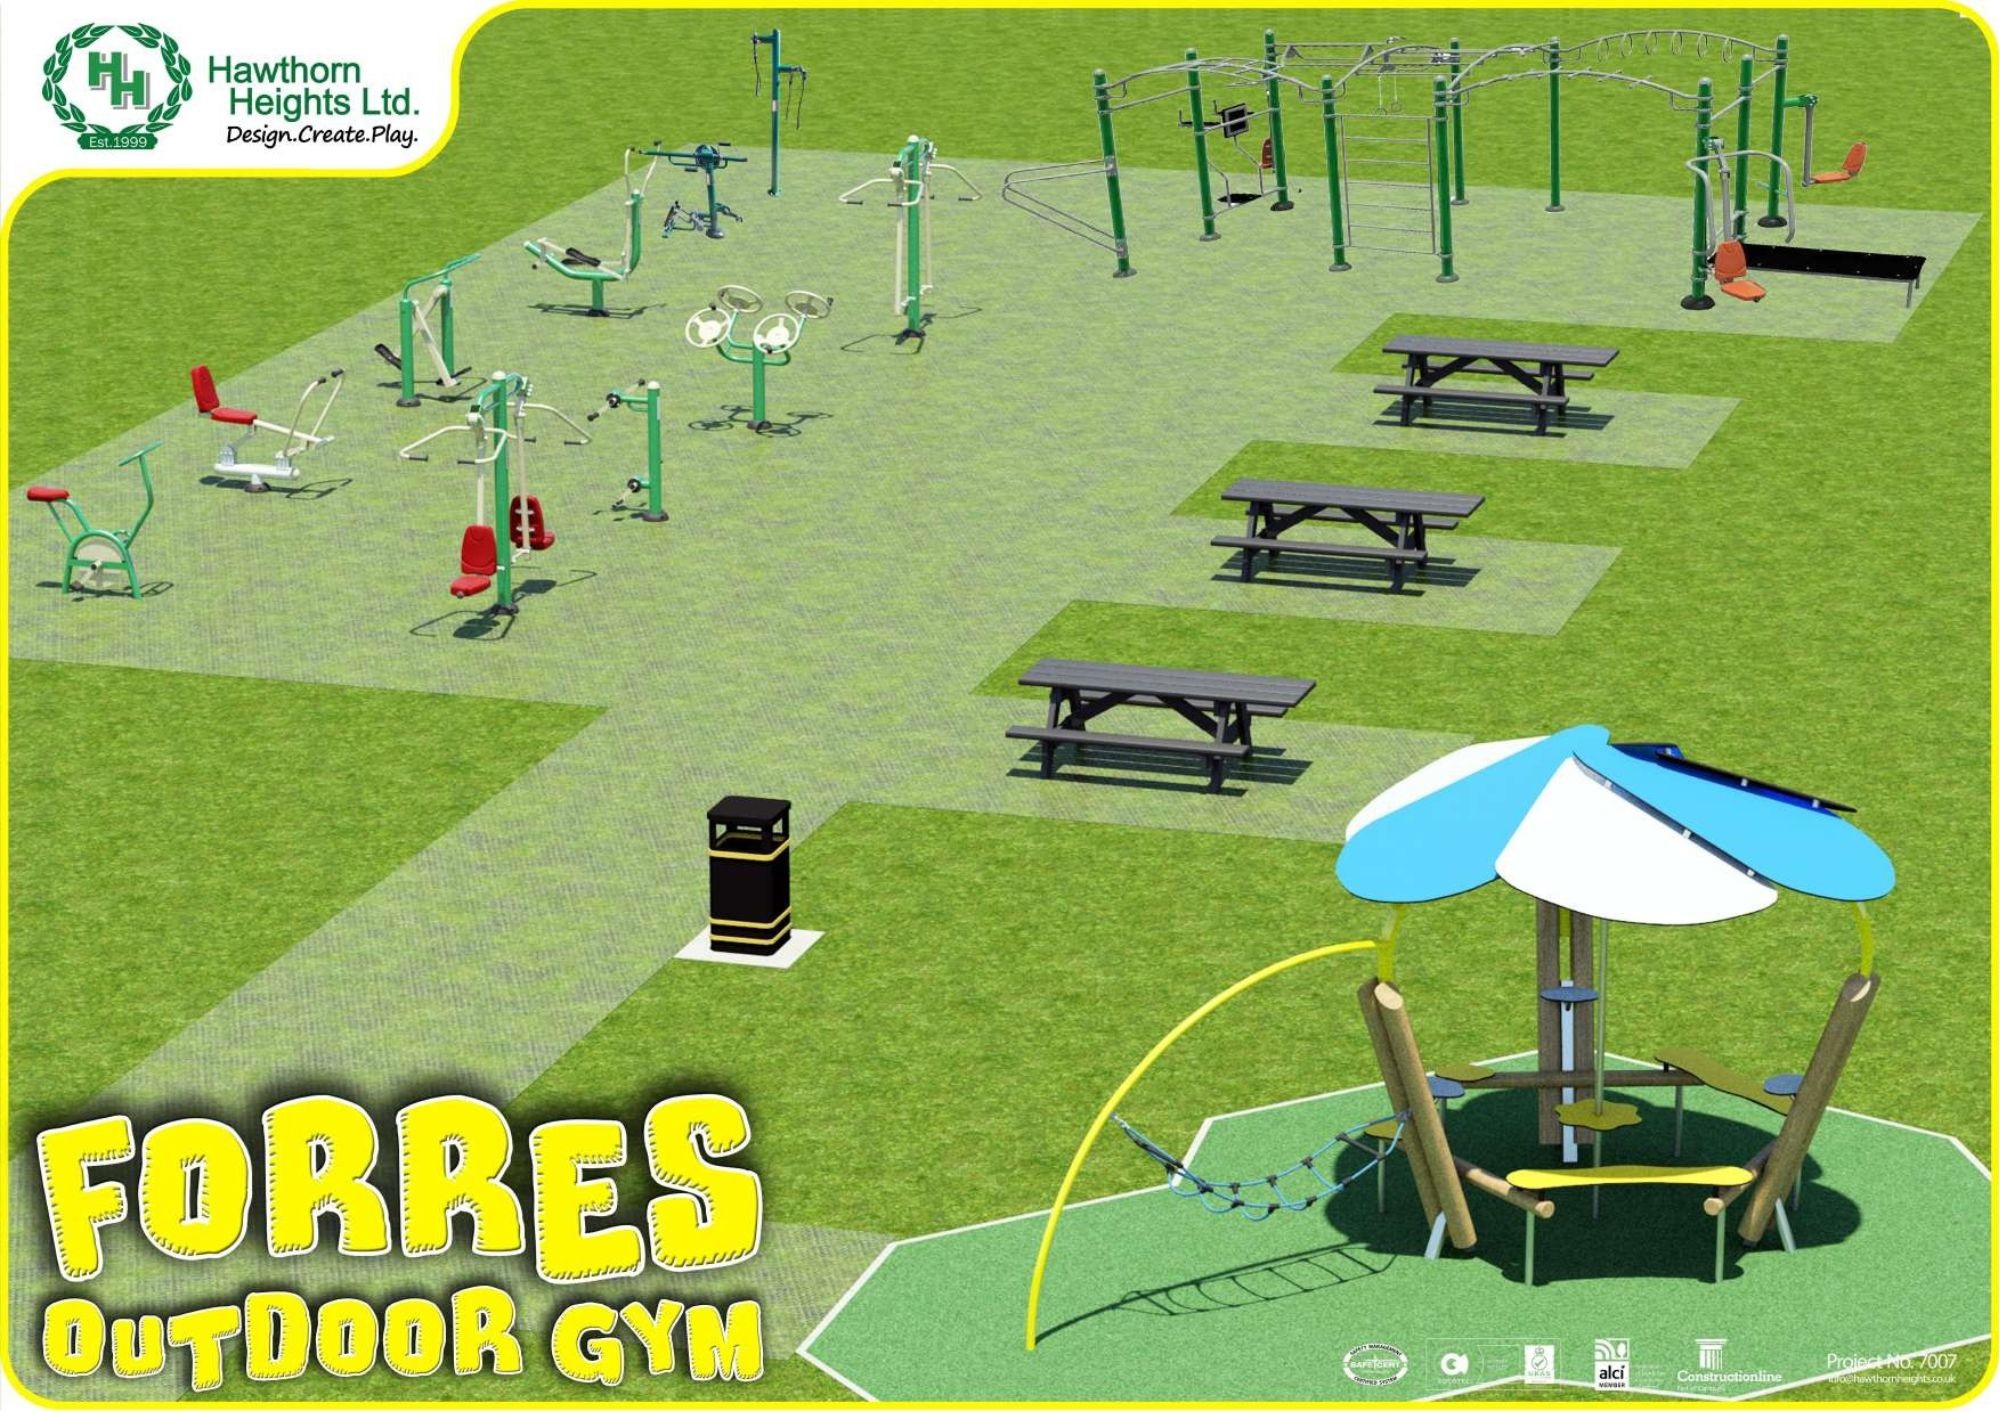 HH_7007_-_Forres_Outdoor_Gym_-_3D.jpg